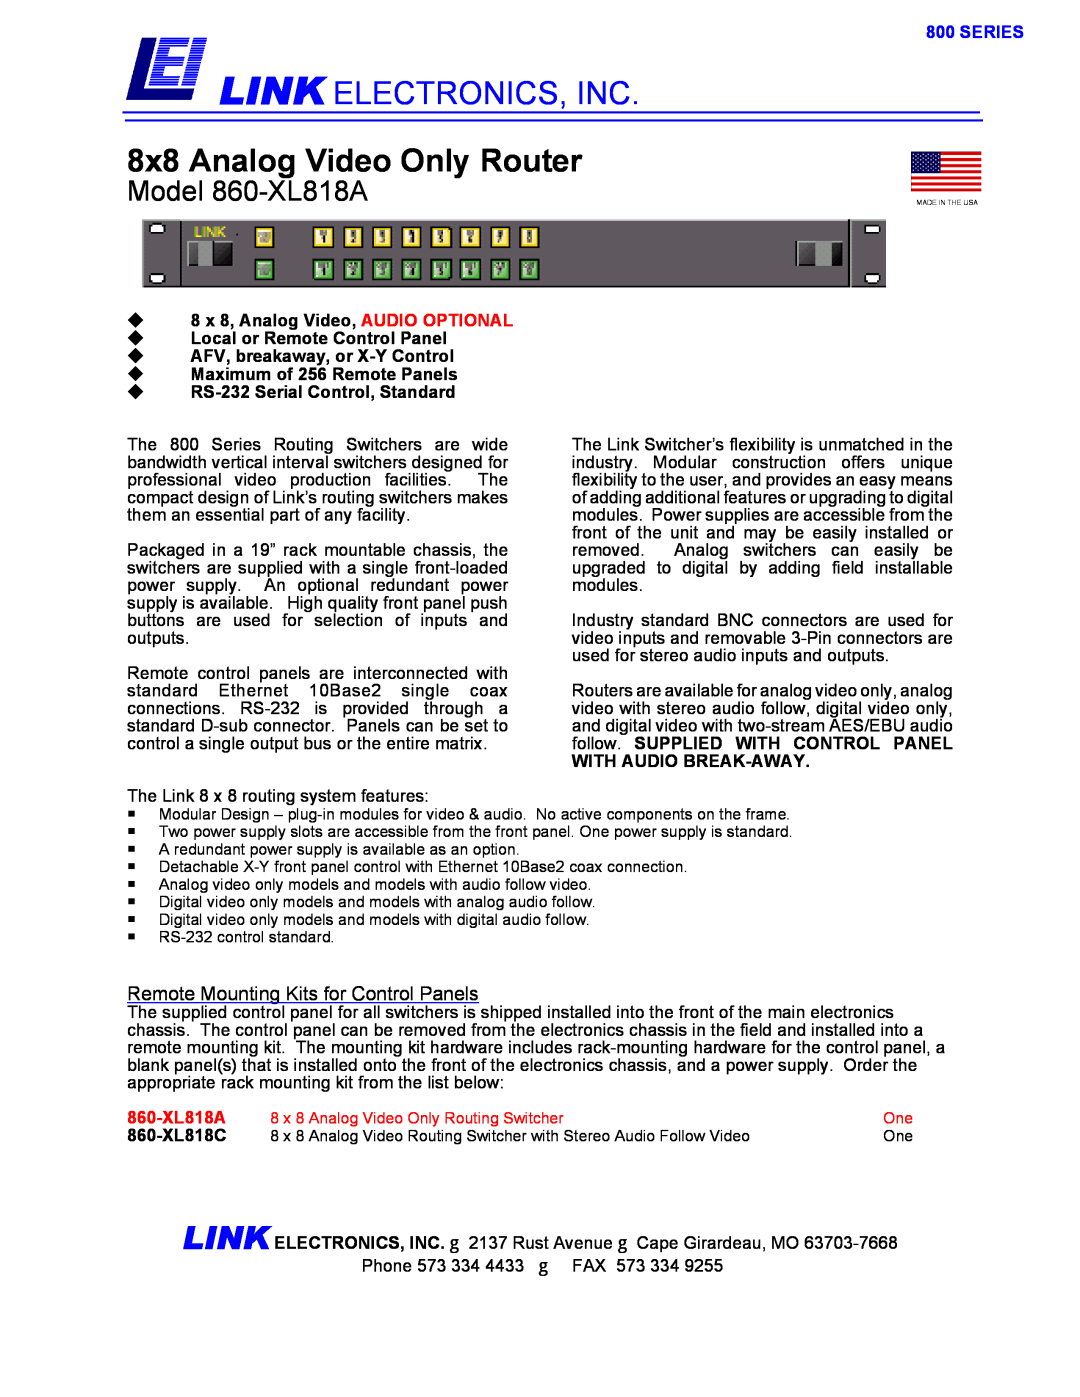 Link electronic manual Series, Link Electronics, Inc, 8x8 Analog Video Only Router, Model 860-XL818A, 860-XL818C 